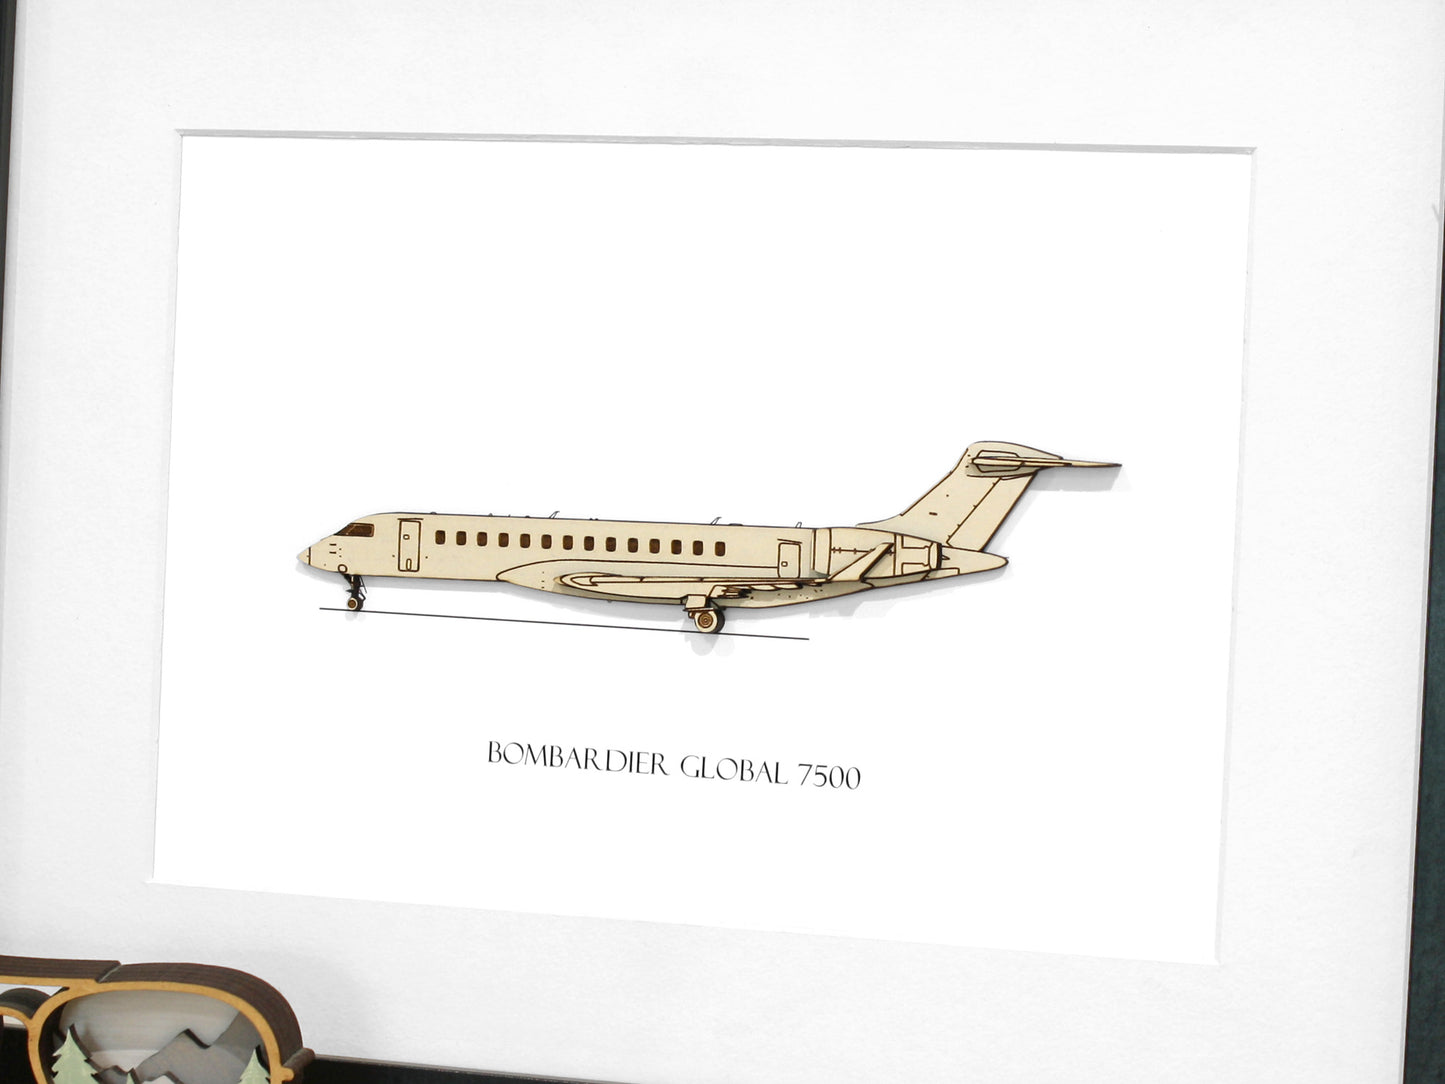 Bombardier Global 7500 pilot gifts